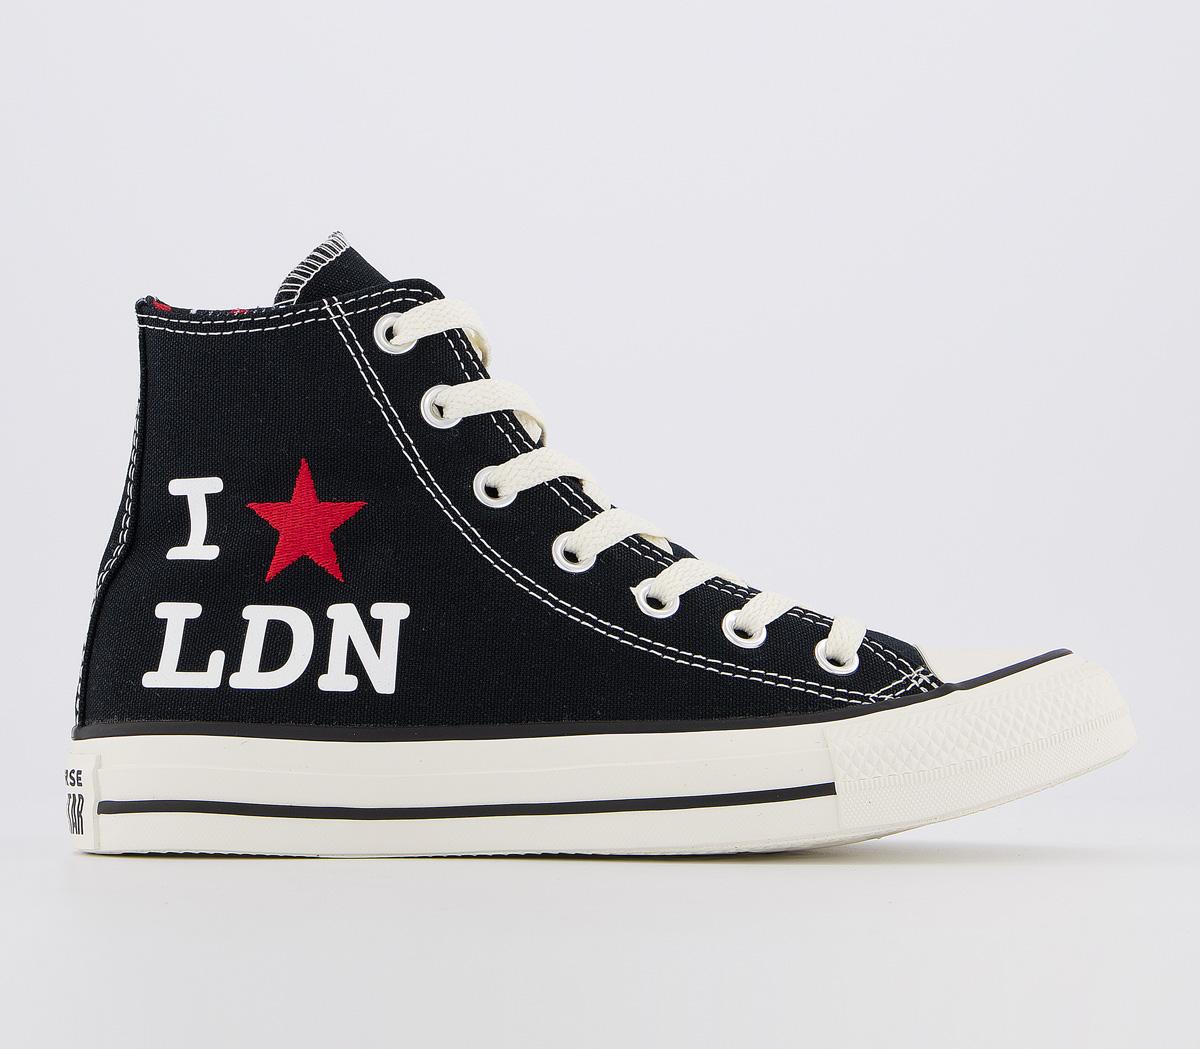 ConverseConverse All Star Hi TrainersBlack White Enamel Red I Star Ldn Exclusive